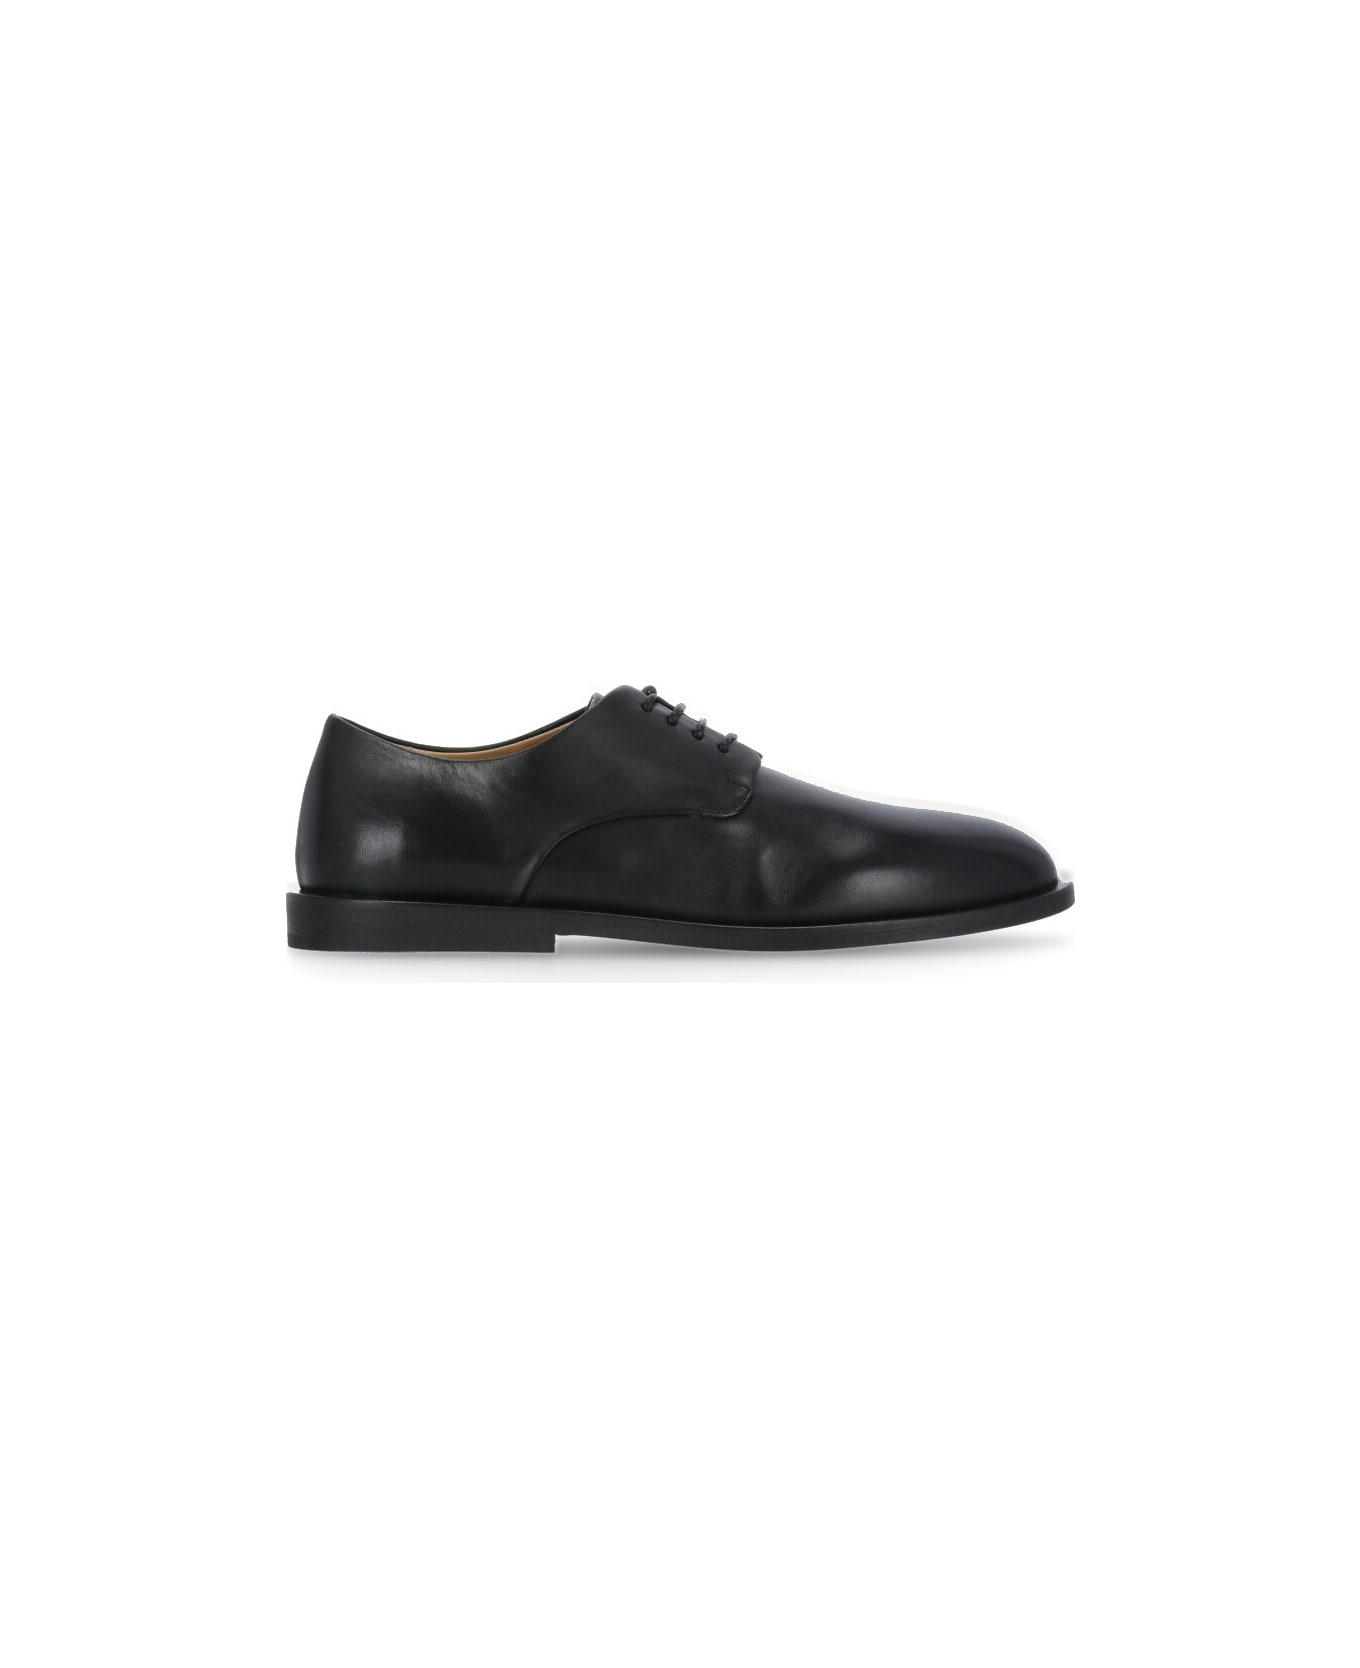 Marsell Mando Derdy Lace-up Shoes - Black フラットシューズ